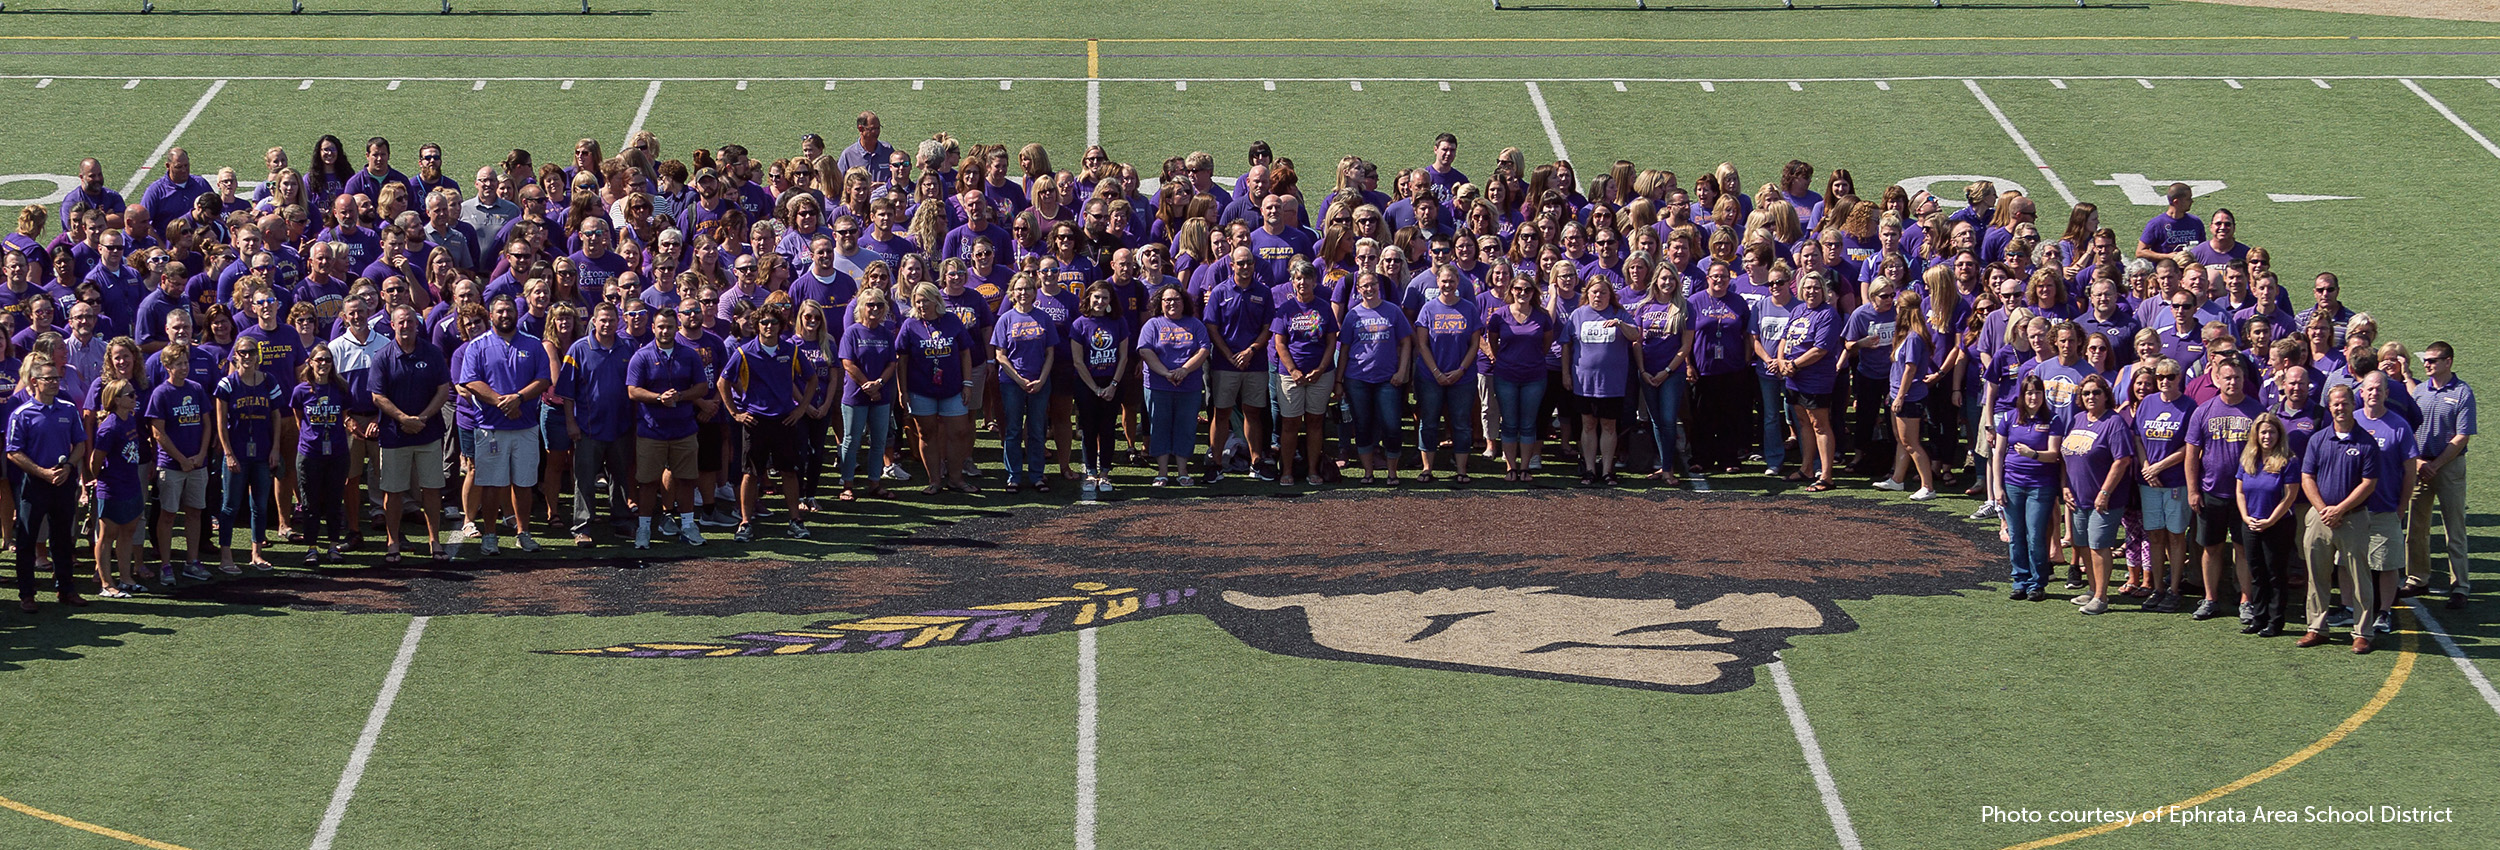 Ephrata Area School District Staff pose at the center of a football field